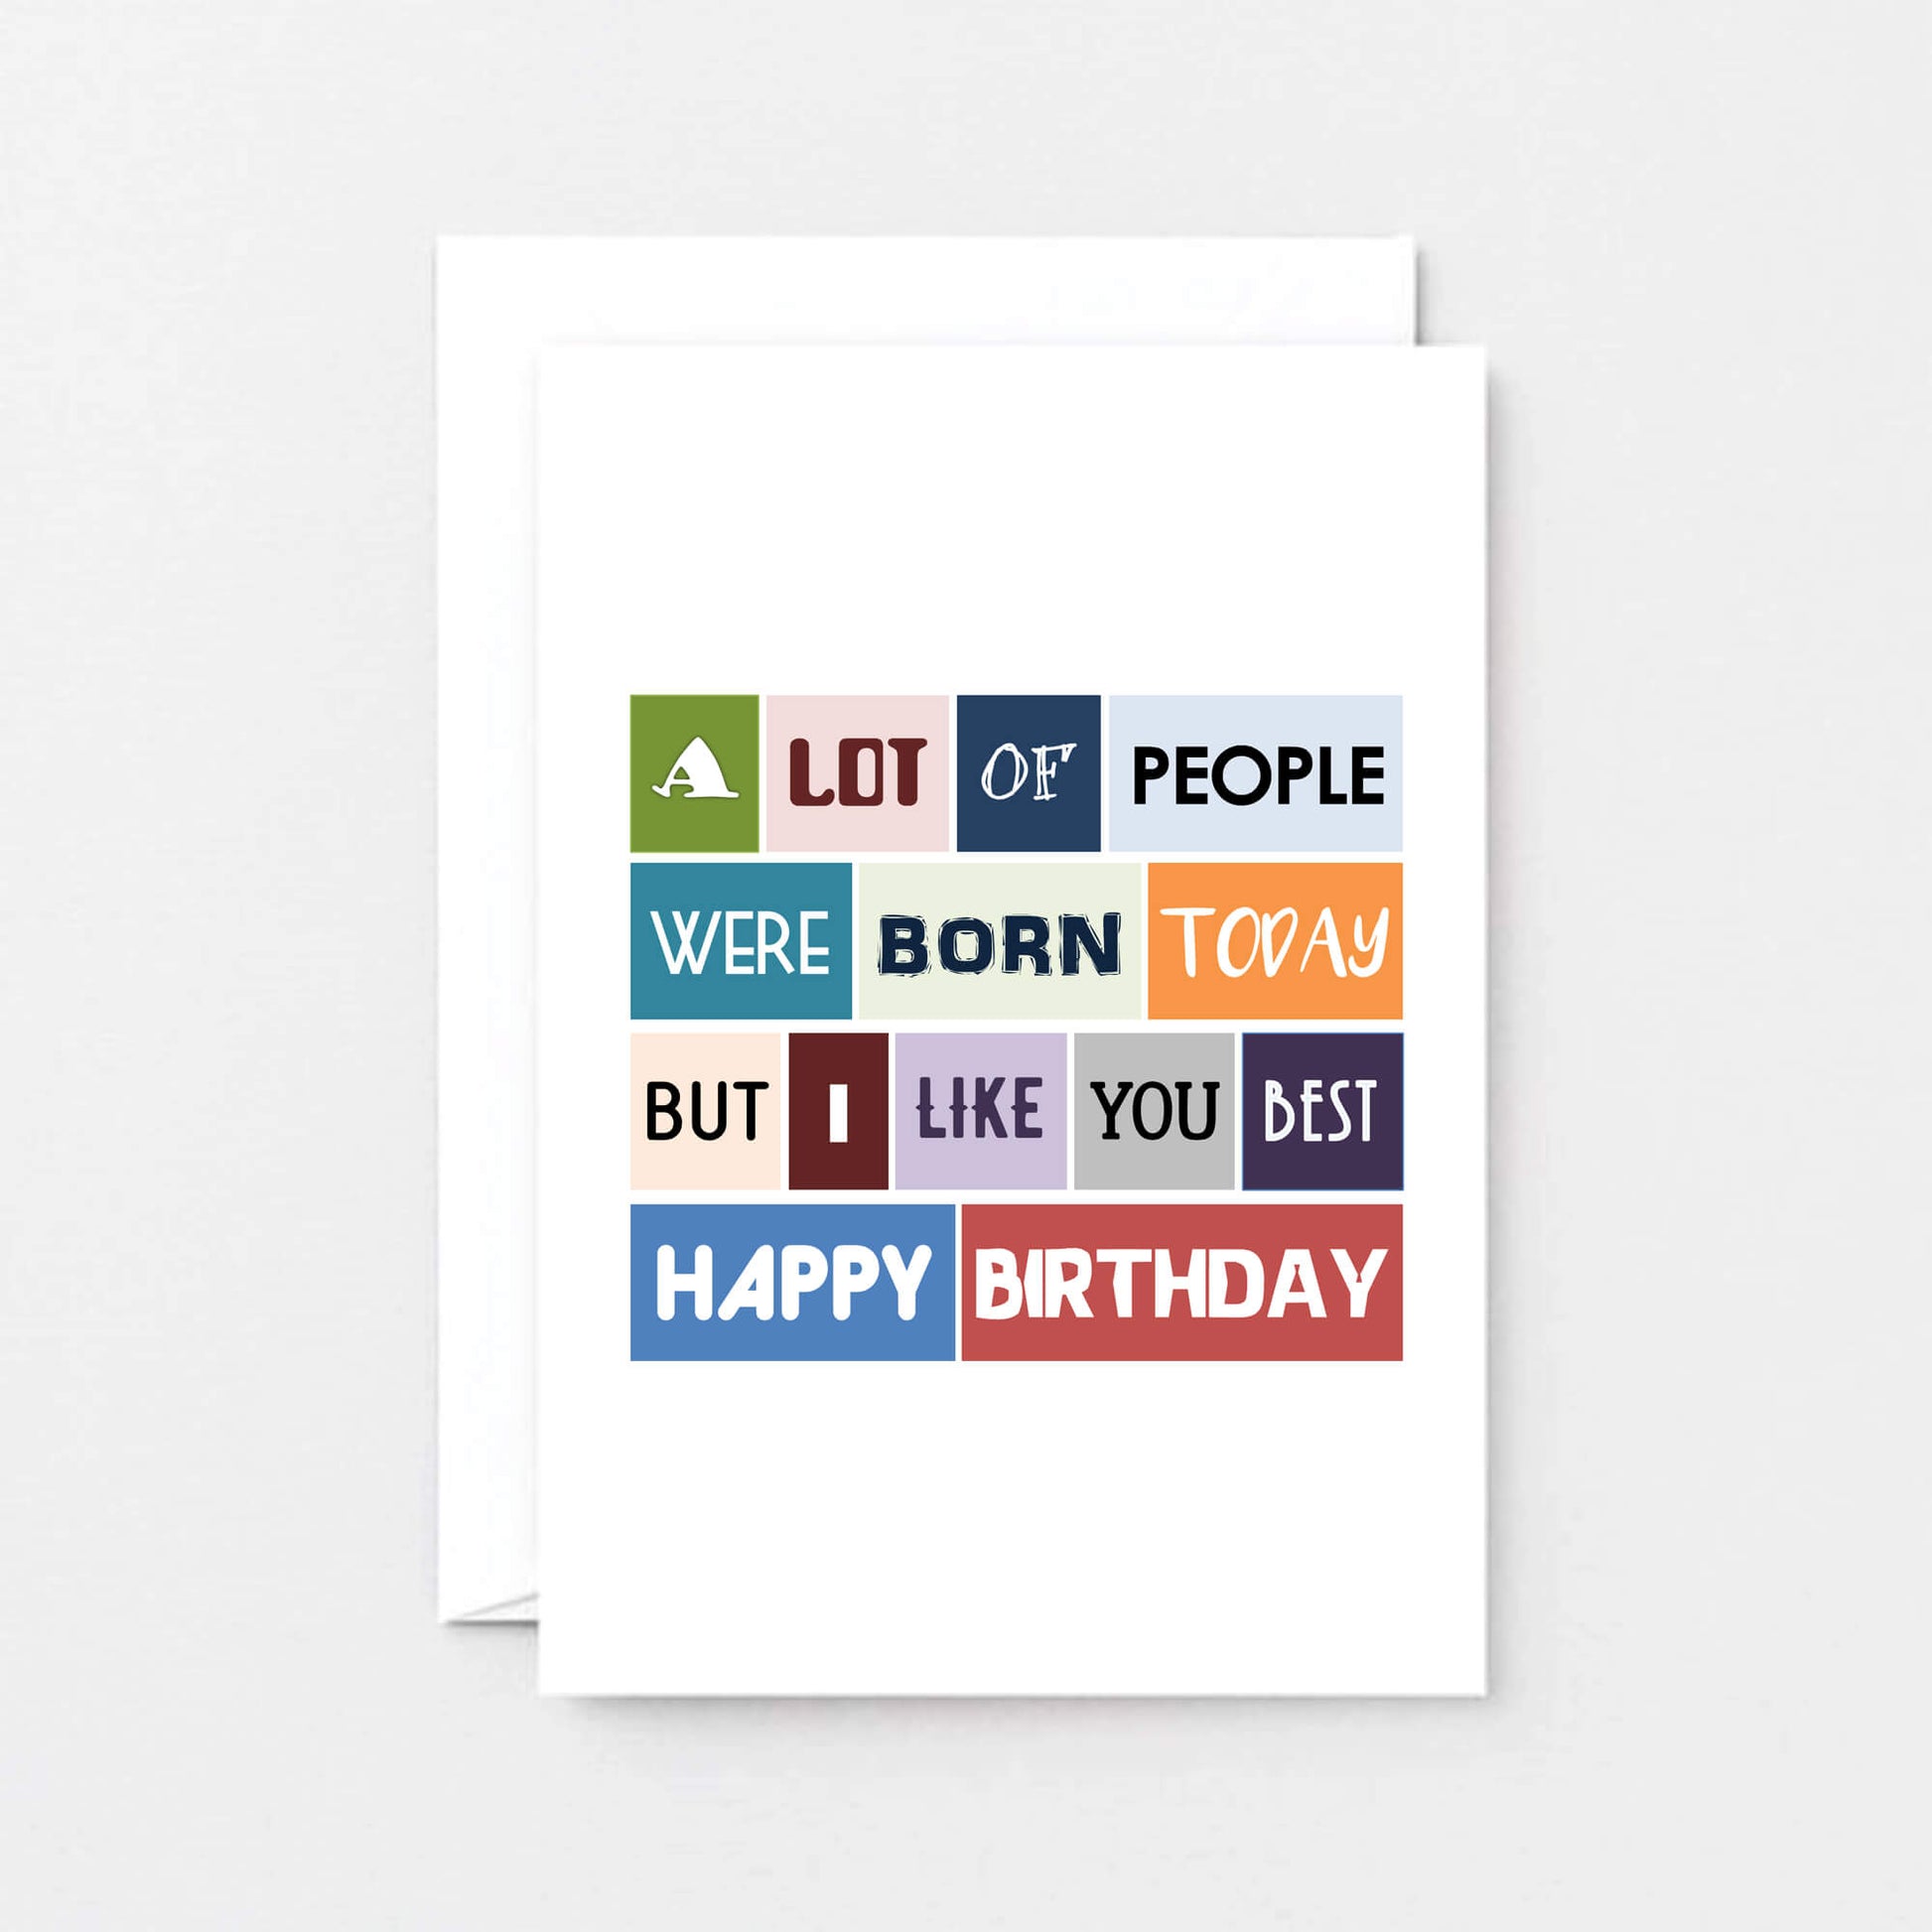 Birthday Card by SixElevenCreations. Reads A lot of people were born today but I like you best. Happy birthday. Product Code SE0042A6